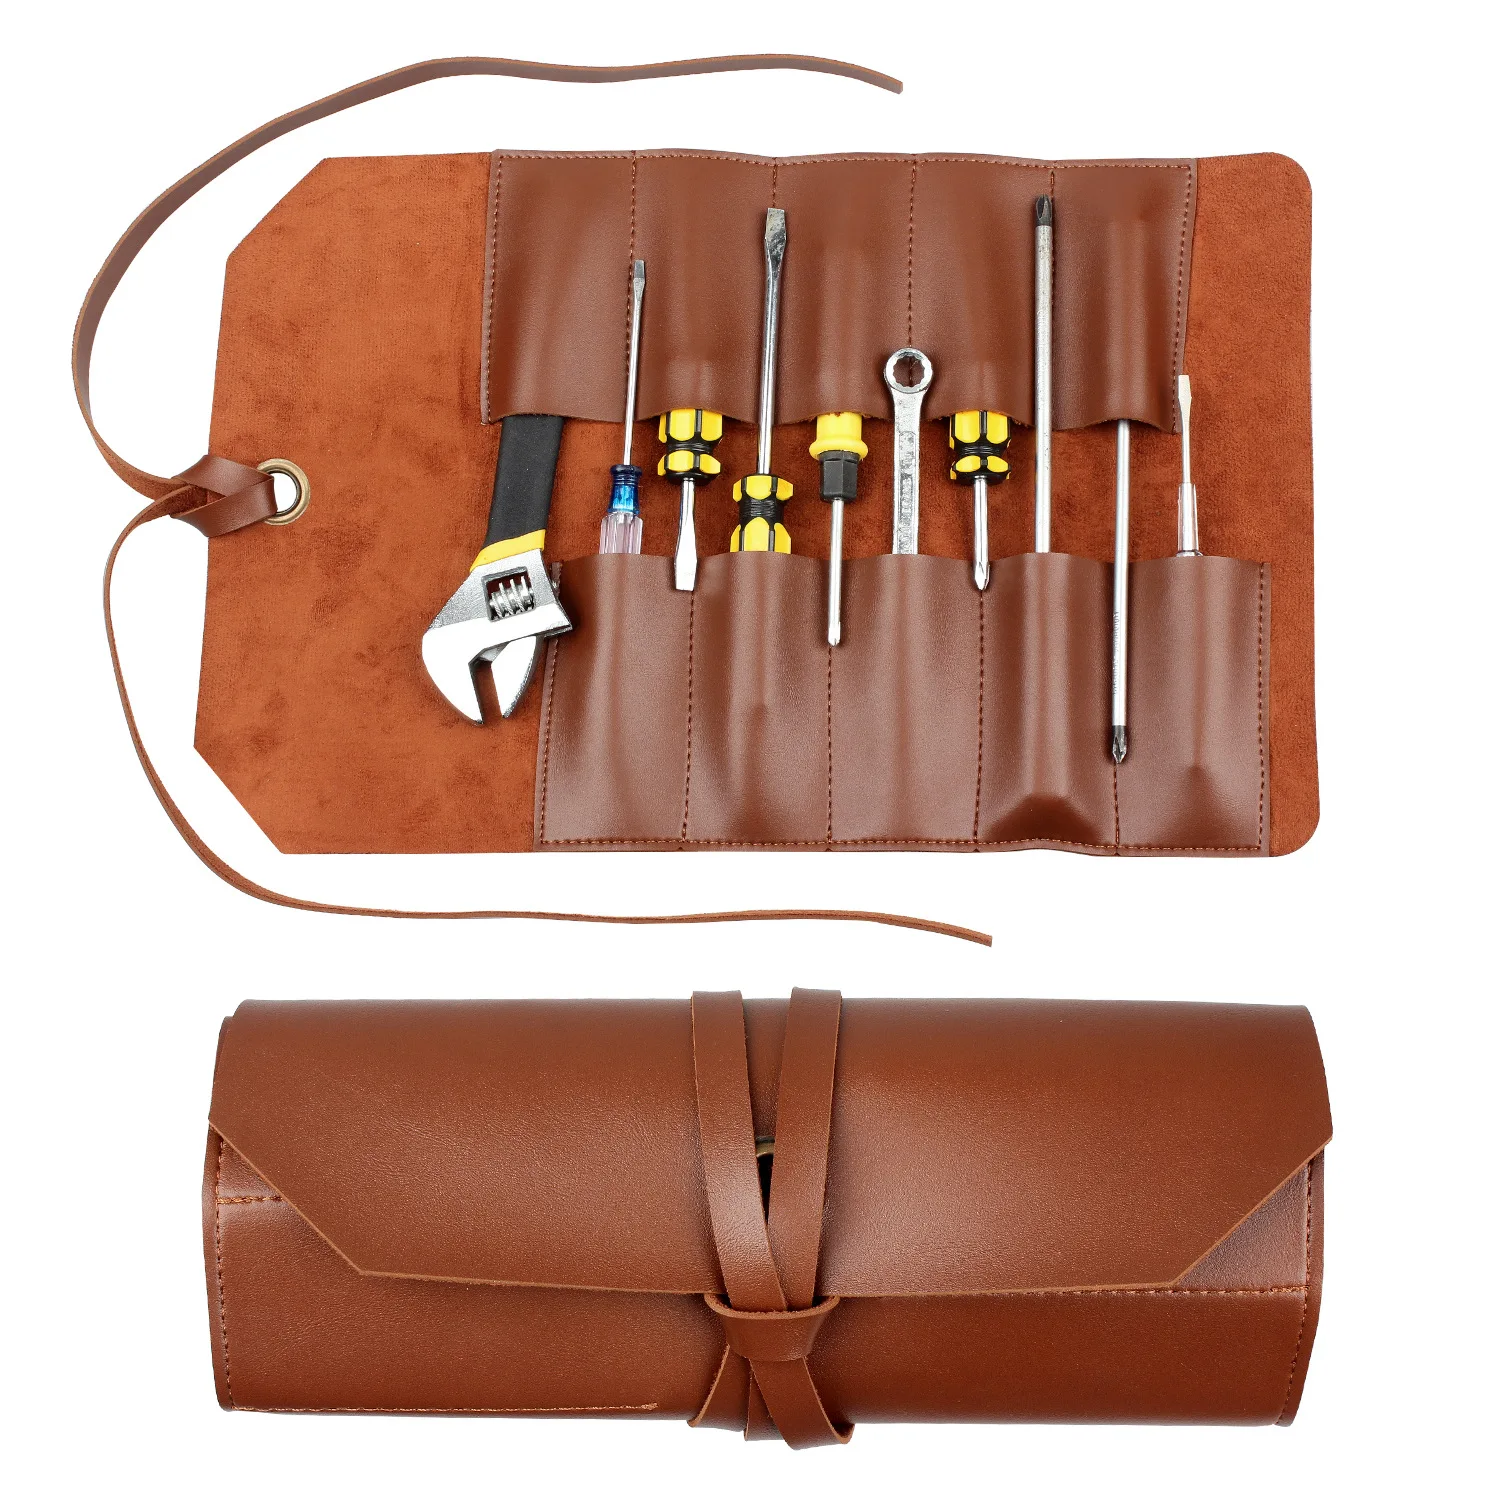 Multifunction Thickened leather Wrench Bag Folding Tool Roll-up Bag Storage Pocket Portable Tools Pouch Case Organizer Holder